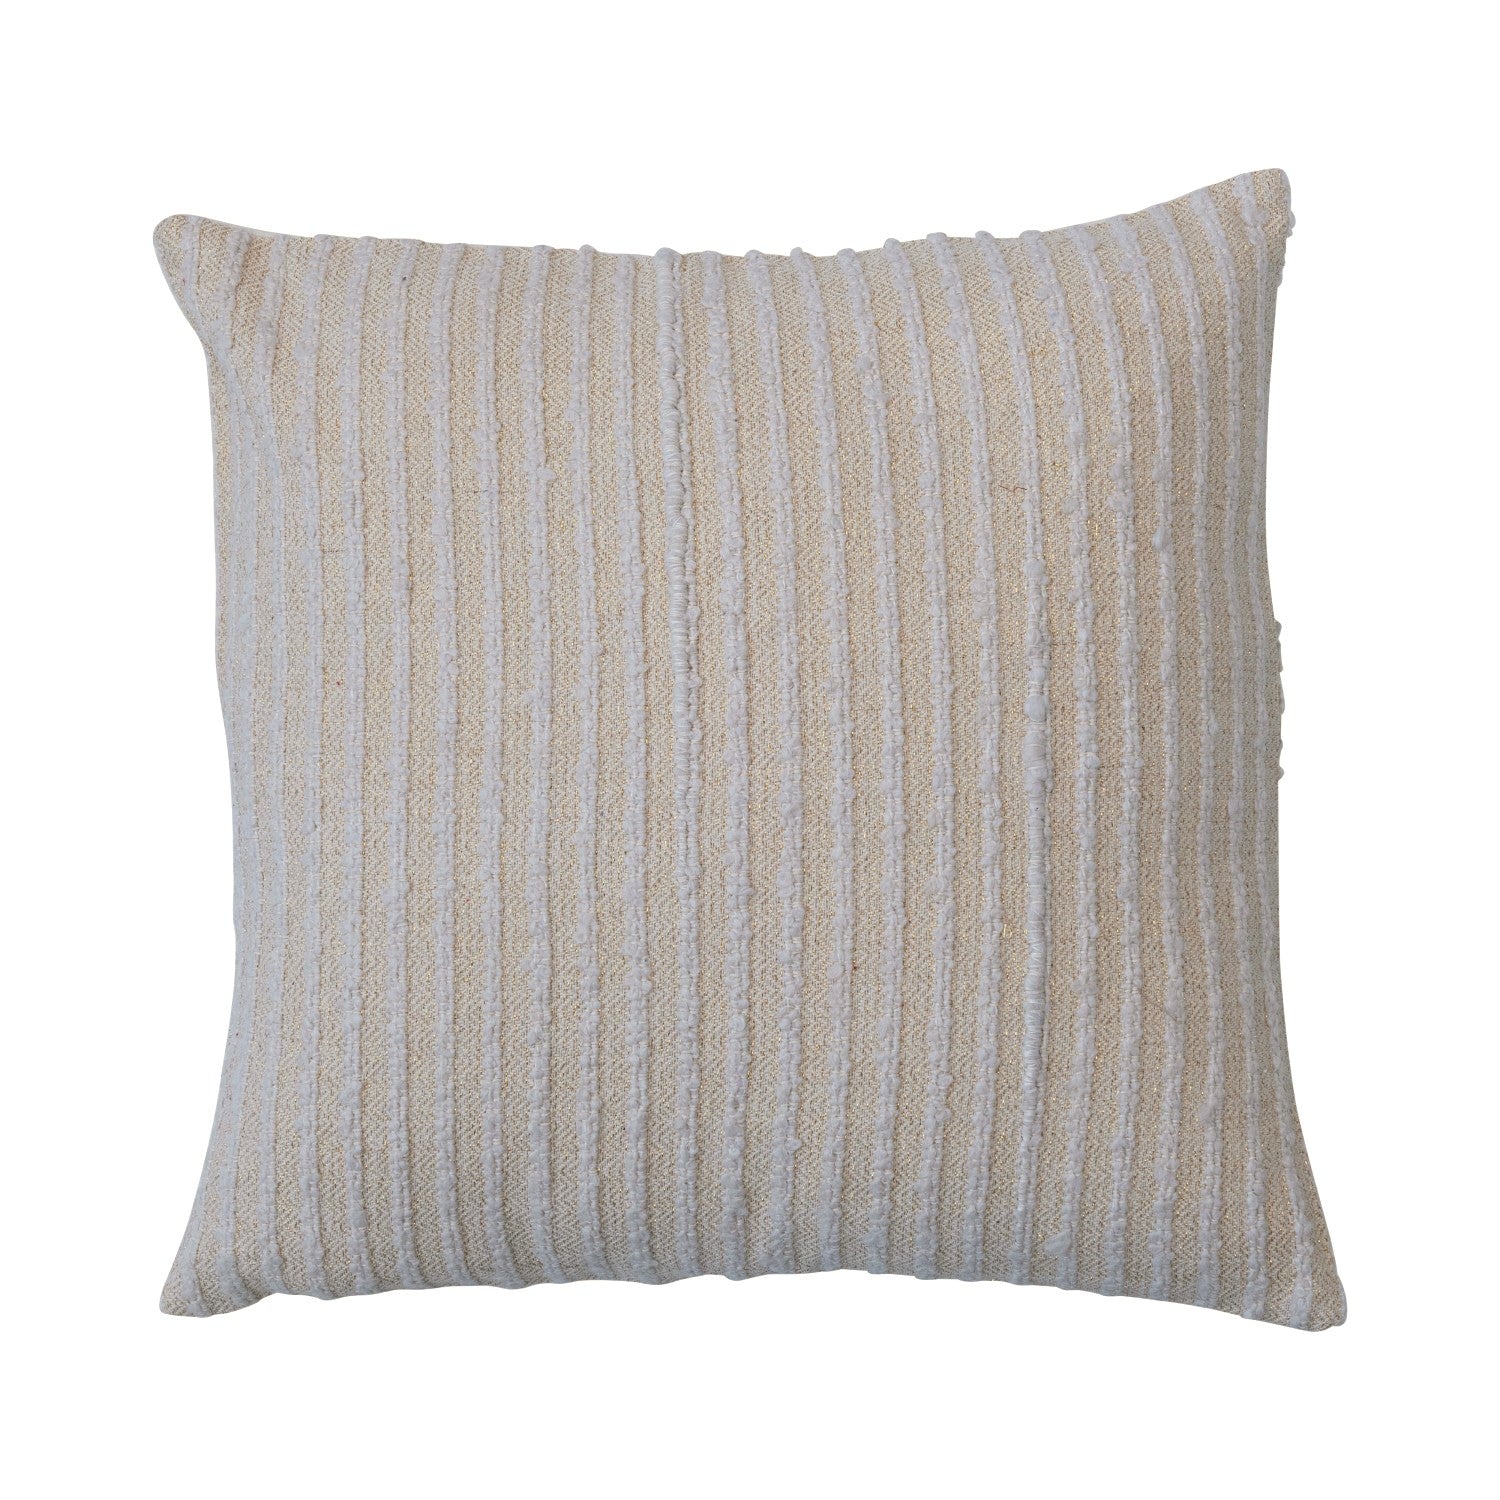 Square Striped Pillow with Gold Thread Shimmer, 20 in.